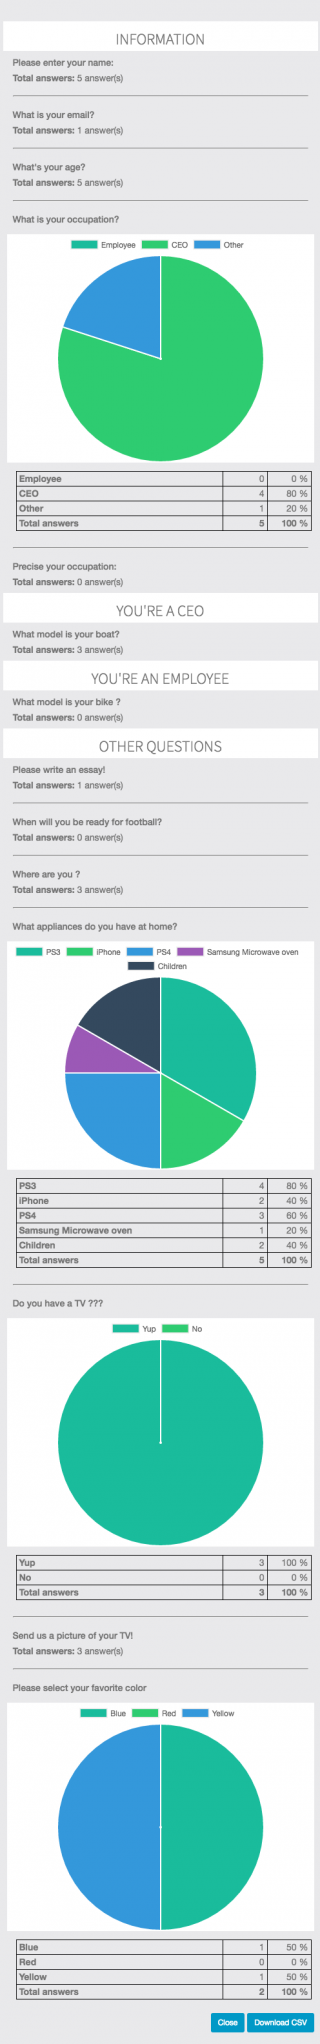 survey_results_view_01